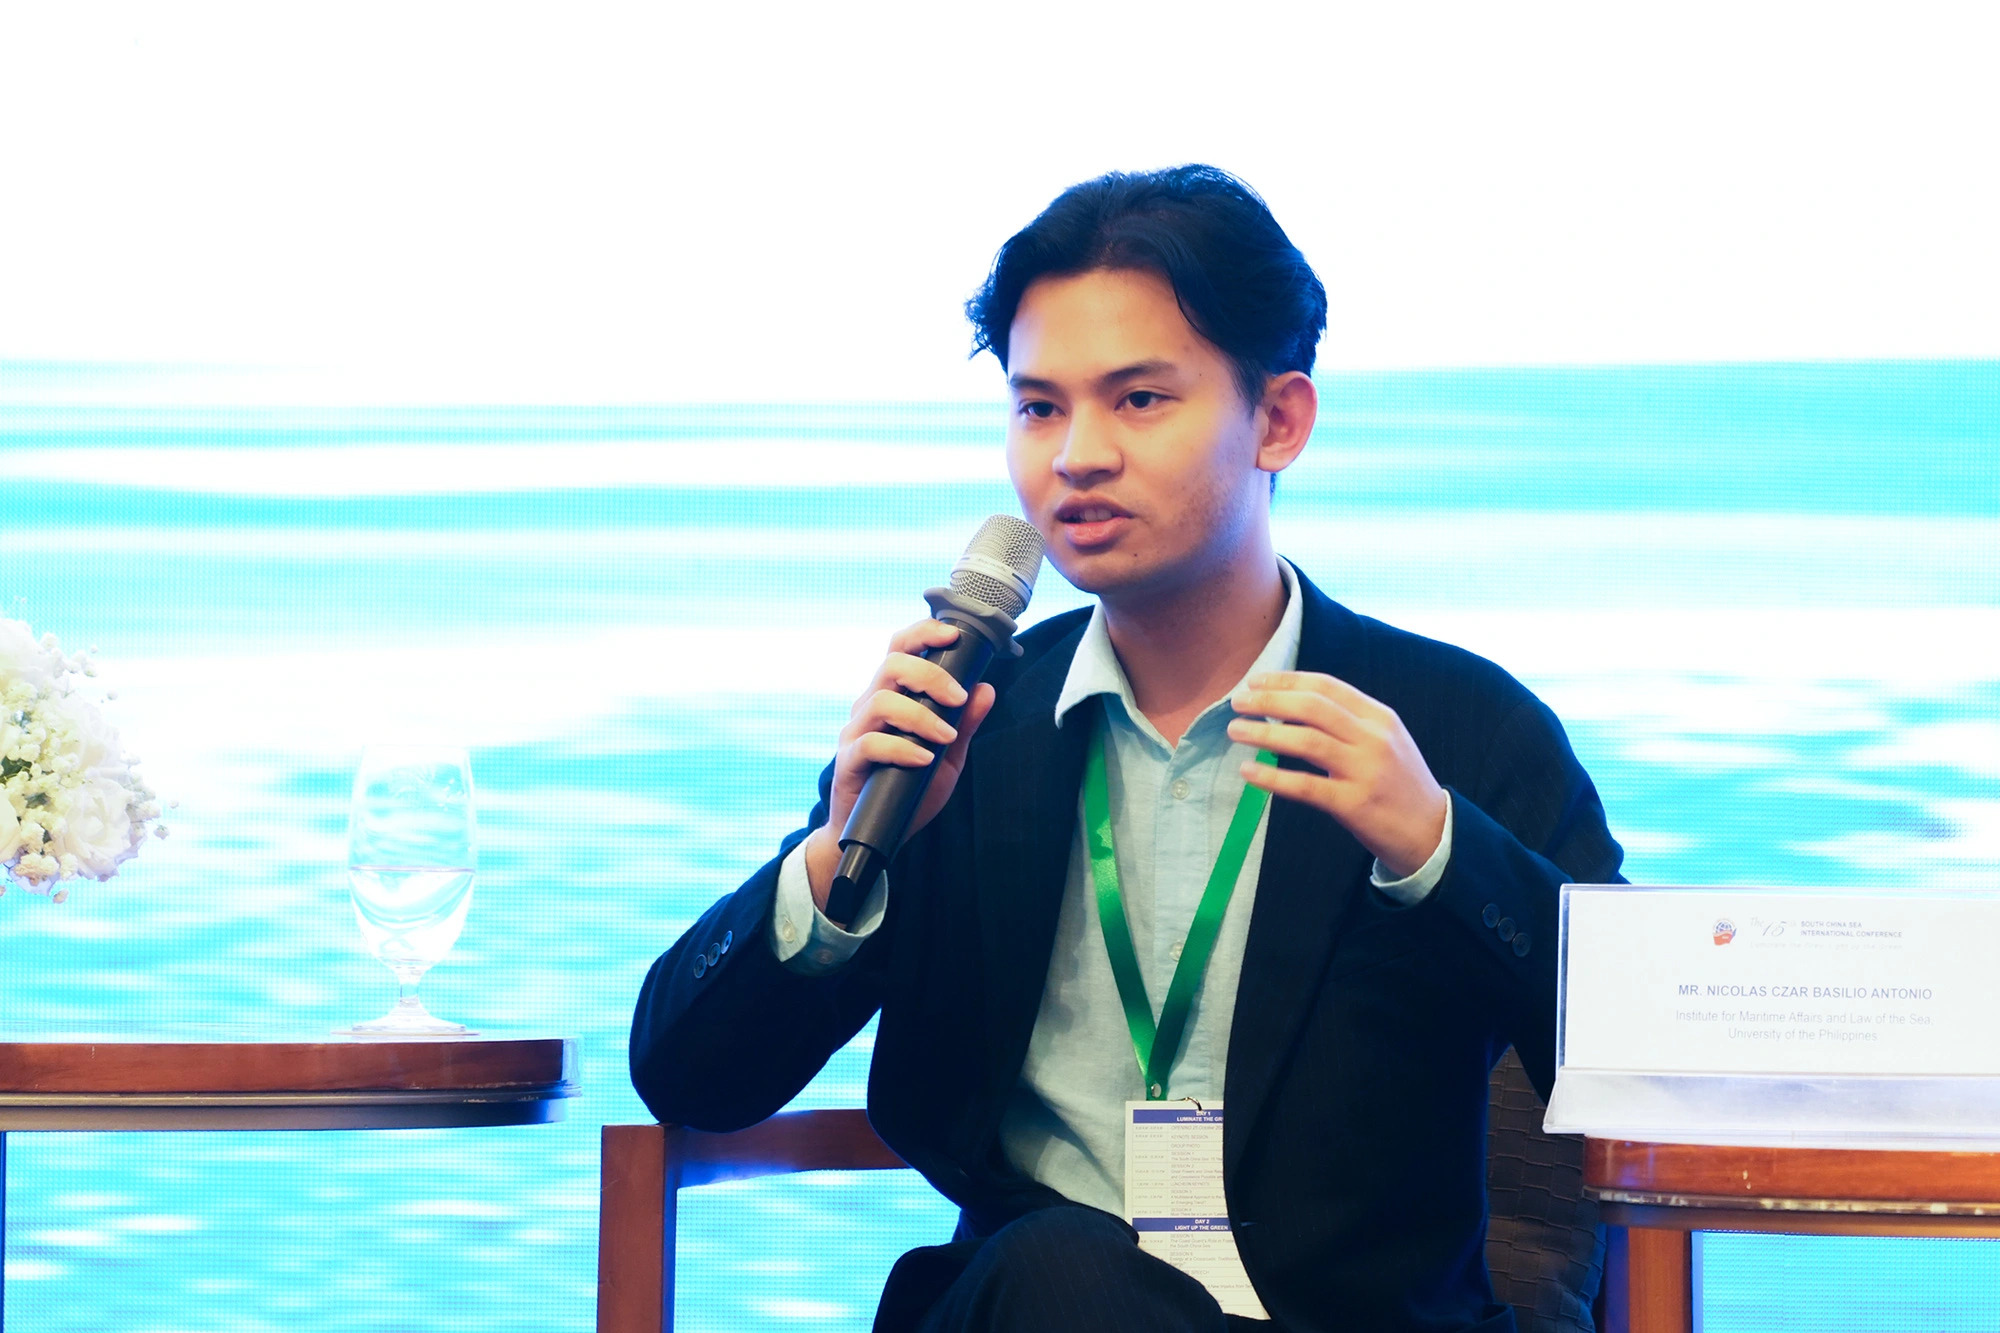 Nicolás Antonio, a research assistant at the University of the Philippines Institute for Maritime Affairs and Law of the Sea, gestures while speaking at the conference, October 26, 2023. Photo: Huu Hanh / Tuoi Tre